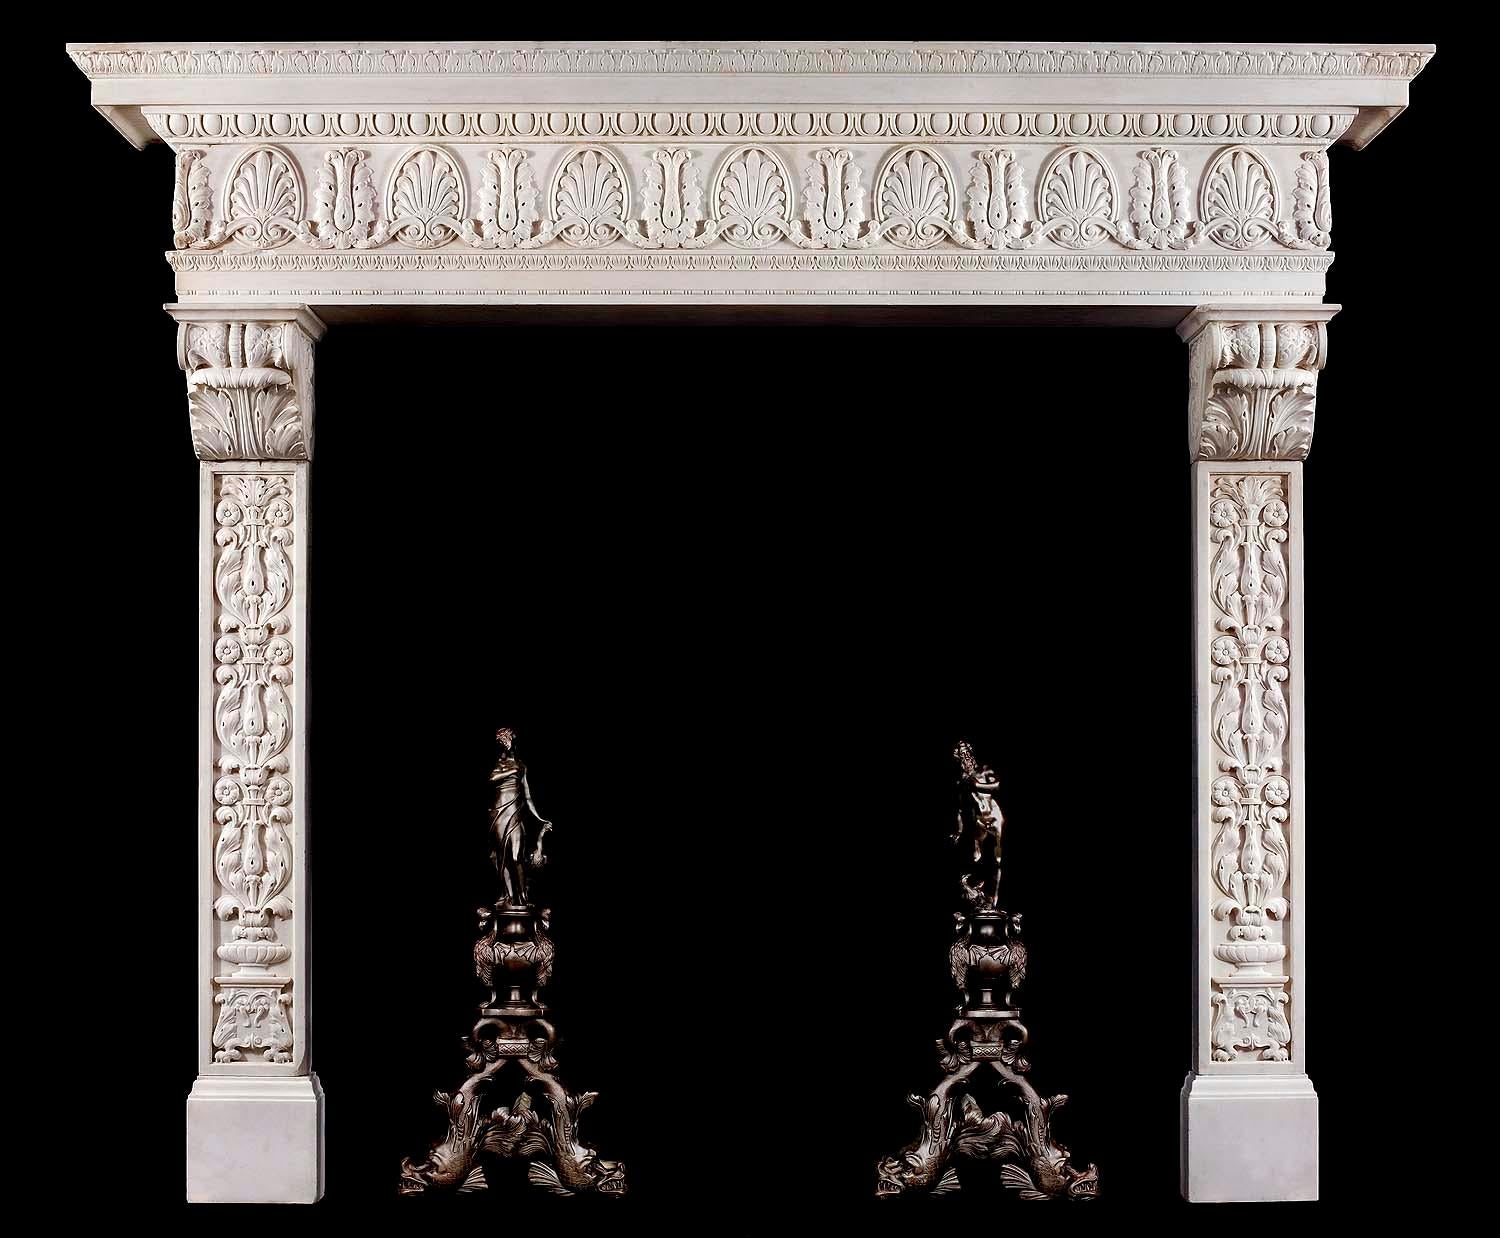 Carved Grand Statuary Marble Antique Italian Renaissance Style Fireplace Mantel